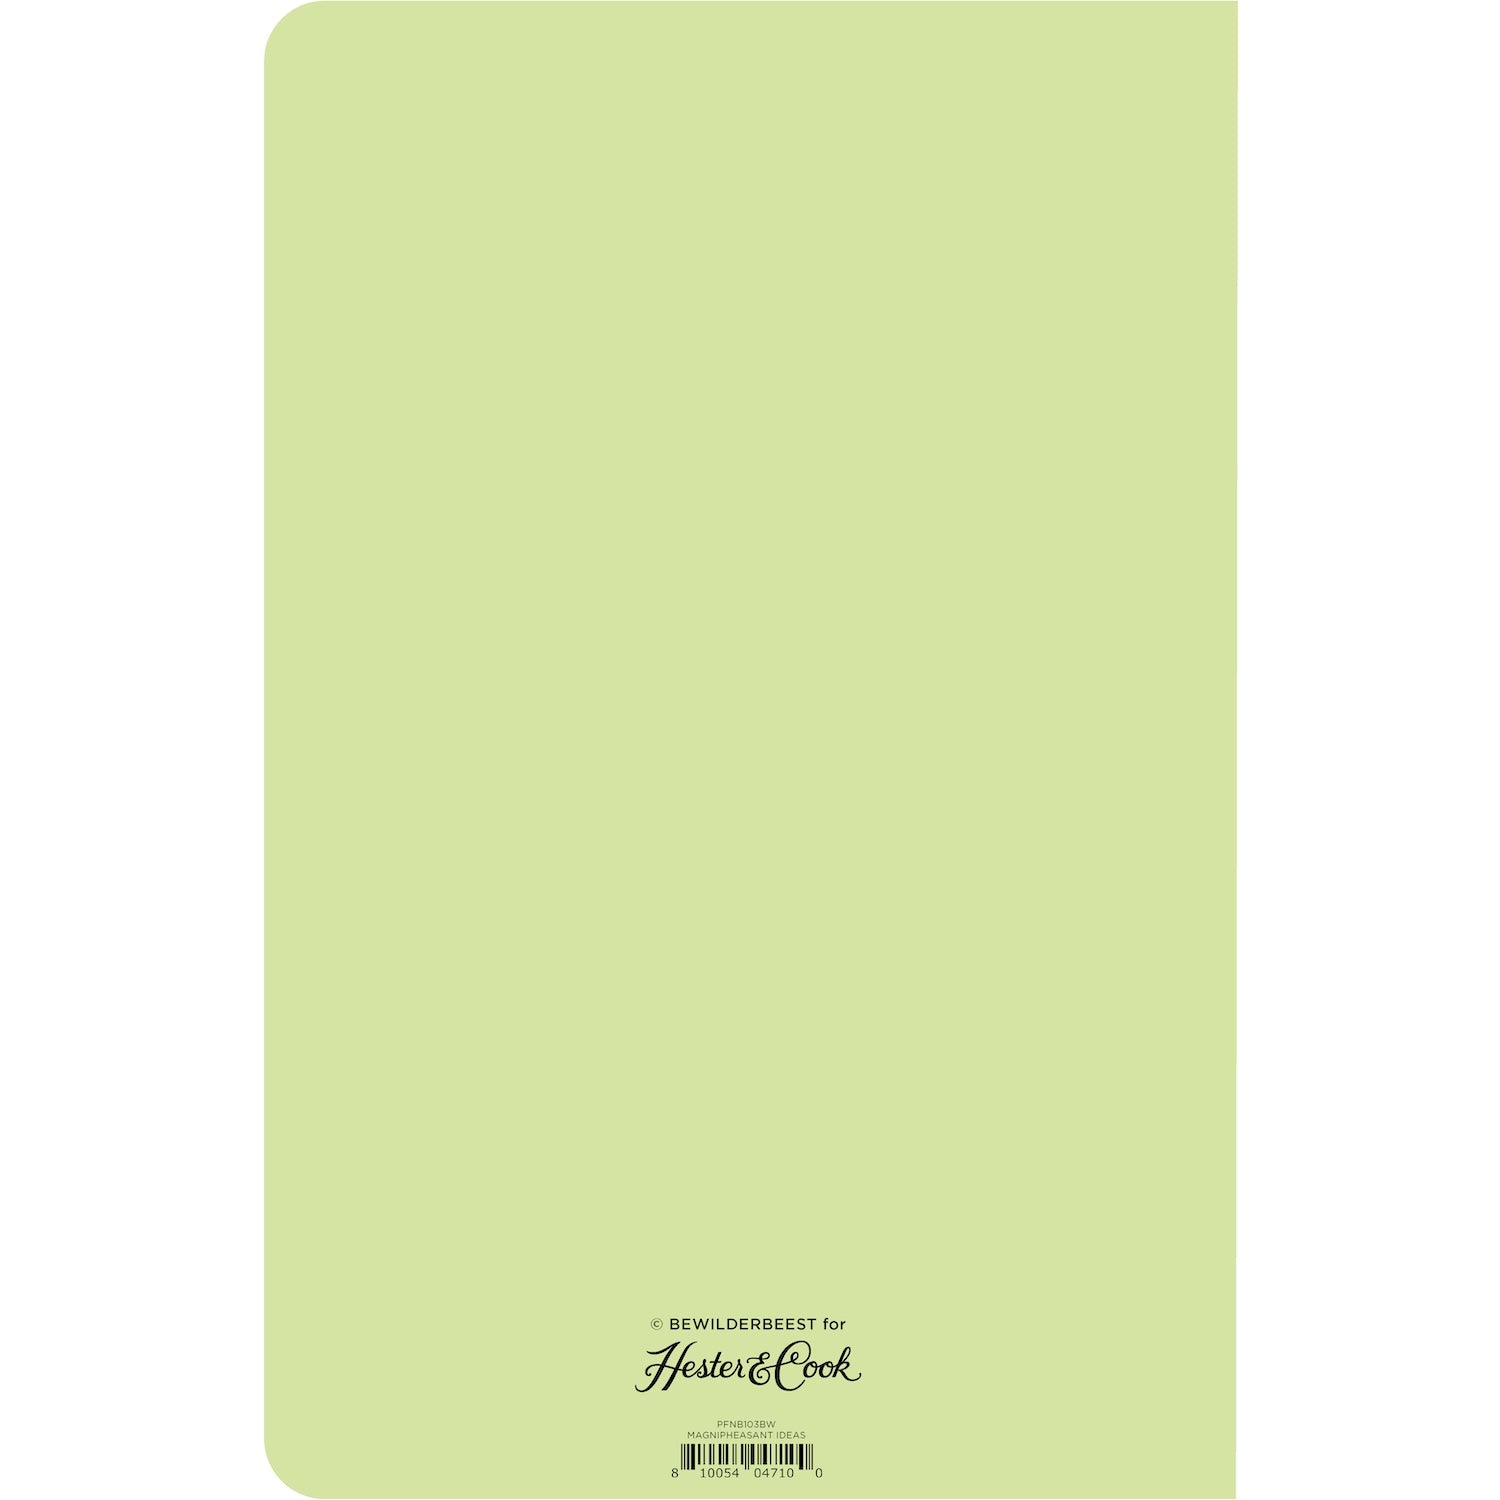 The back cover of the notebook is solid light green with the Hester &amp; Cook logo printed at the bottom. 